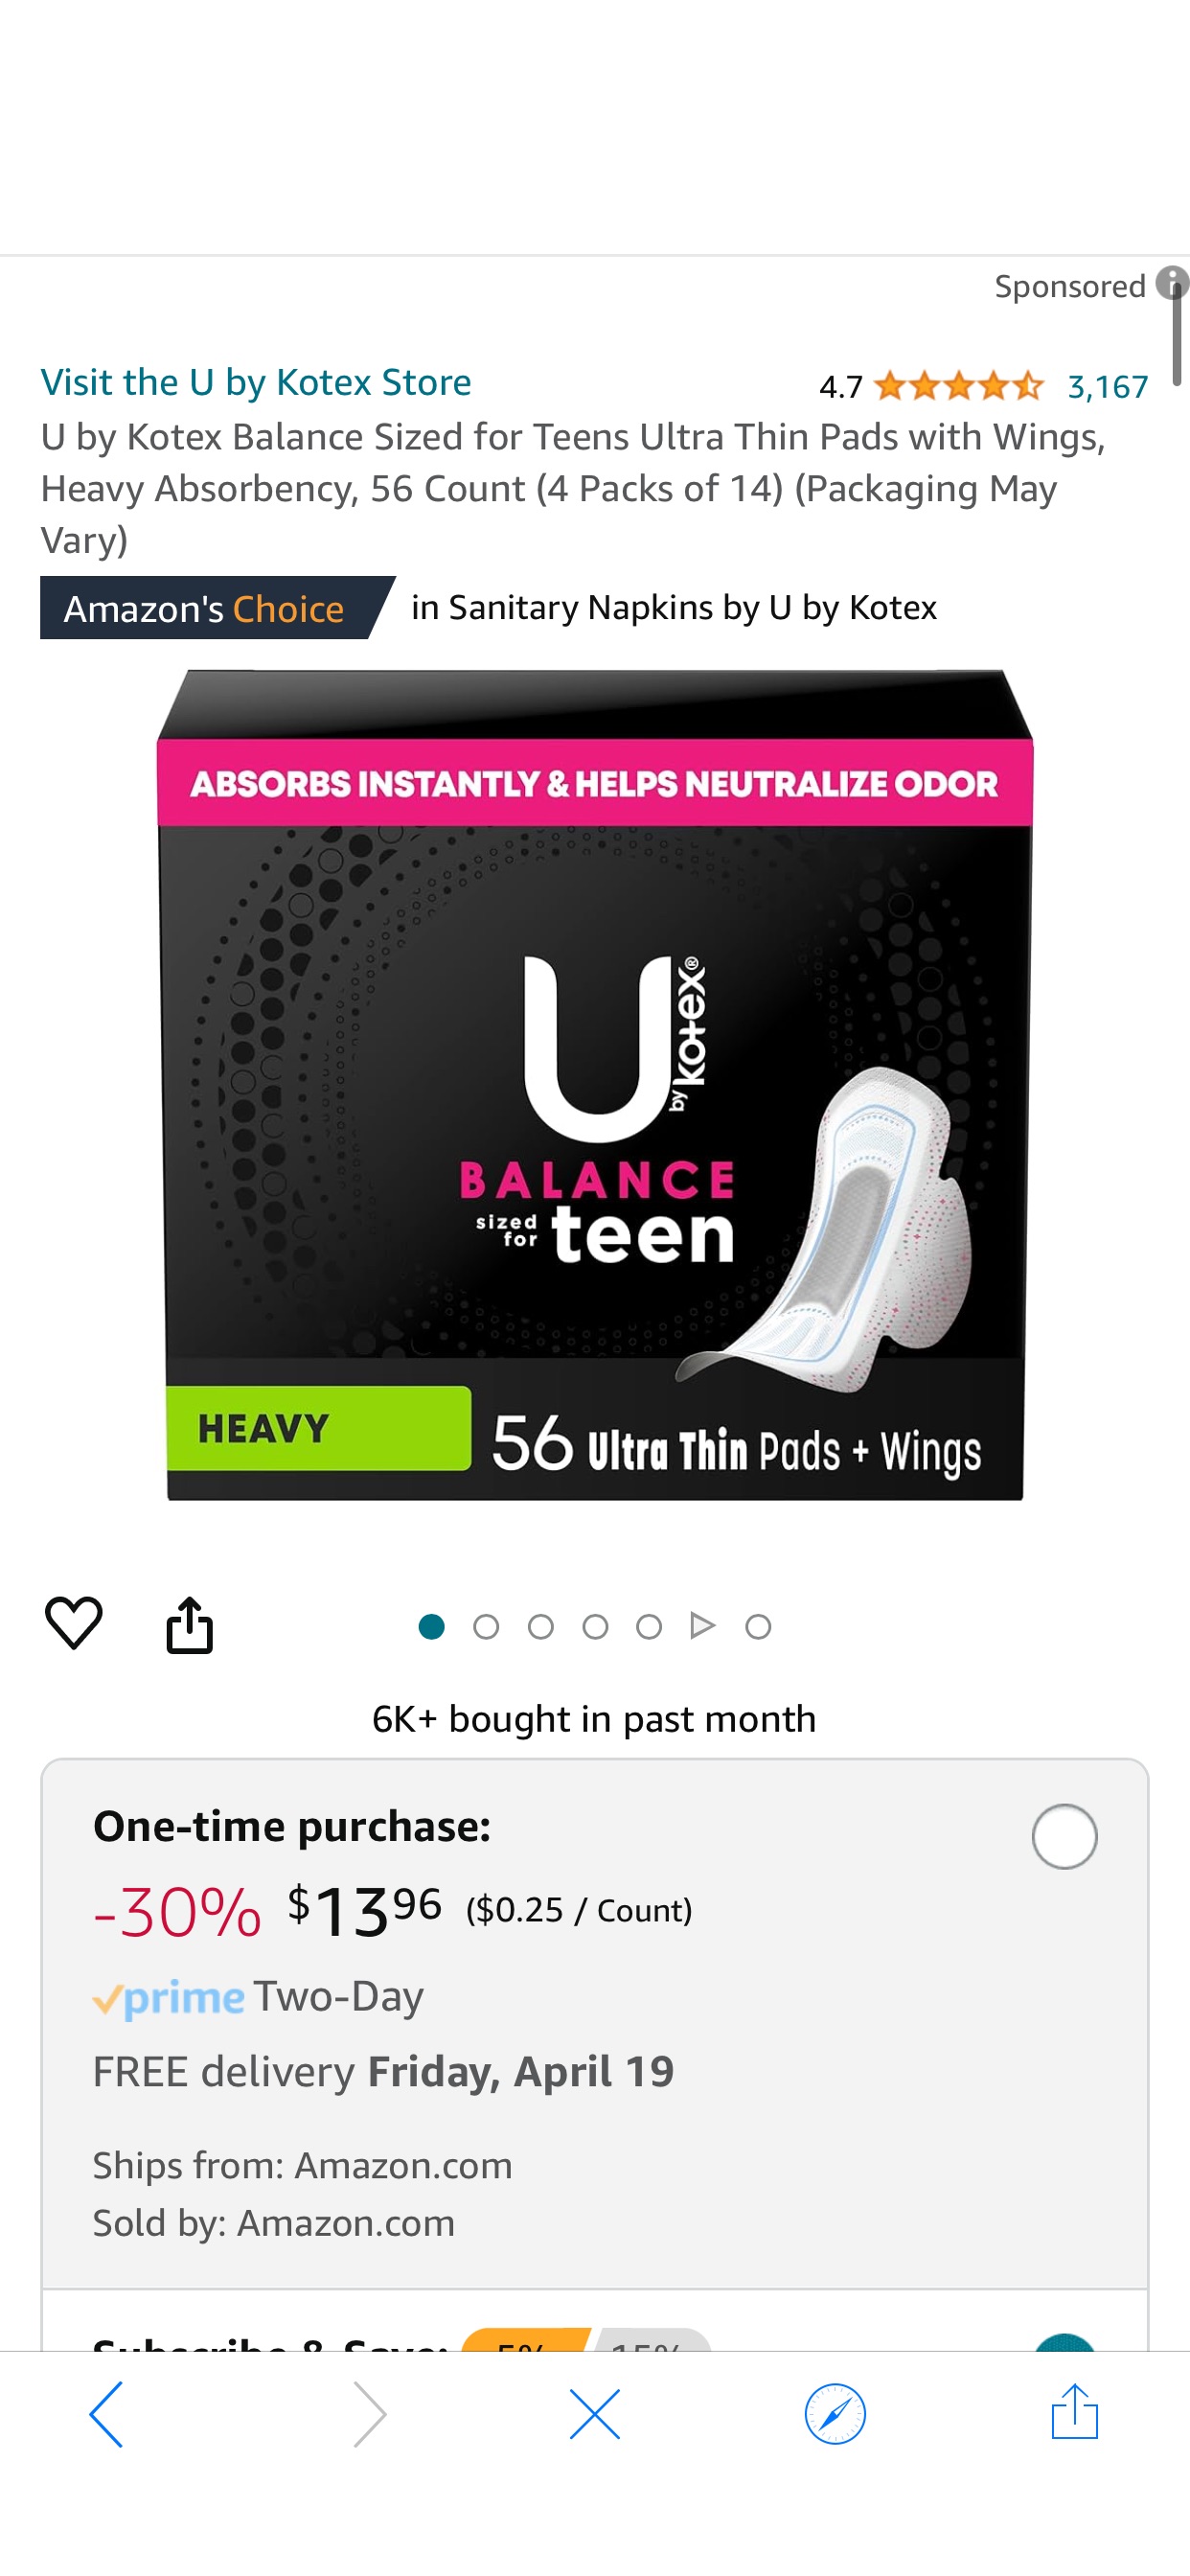 Amazon.com: U by Kotex Balance Sized for Teens Ultra Thin Pads with Wings, Heavy Absorbency, 56 Count (4 Packs of 14) (Packaging May Vary) : Health & Household 卫生巾